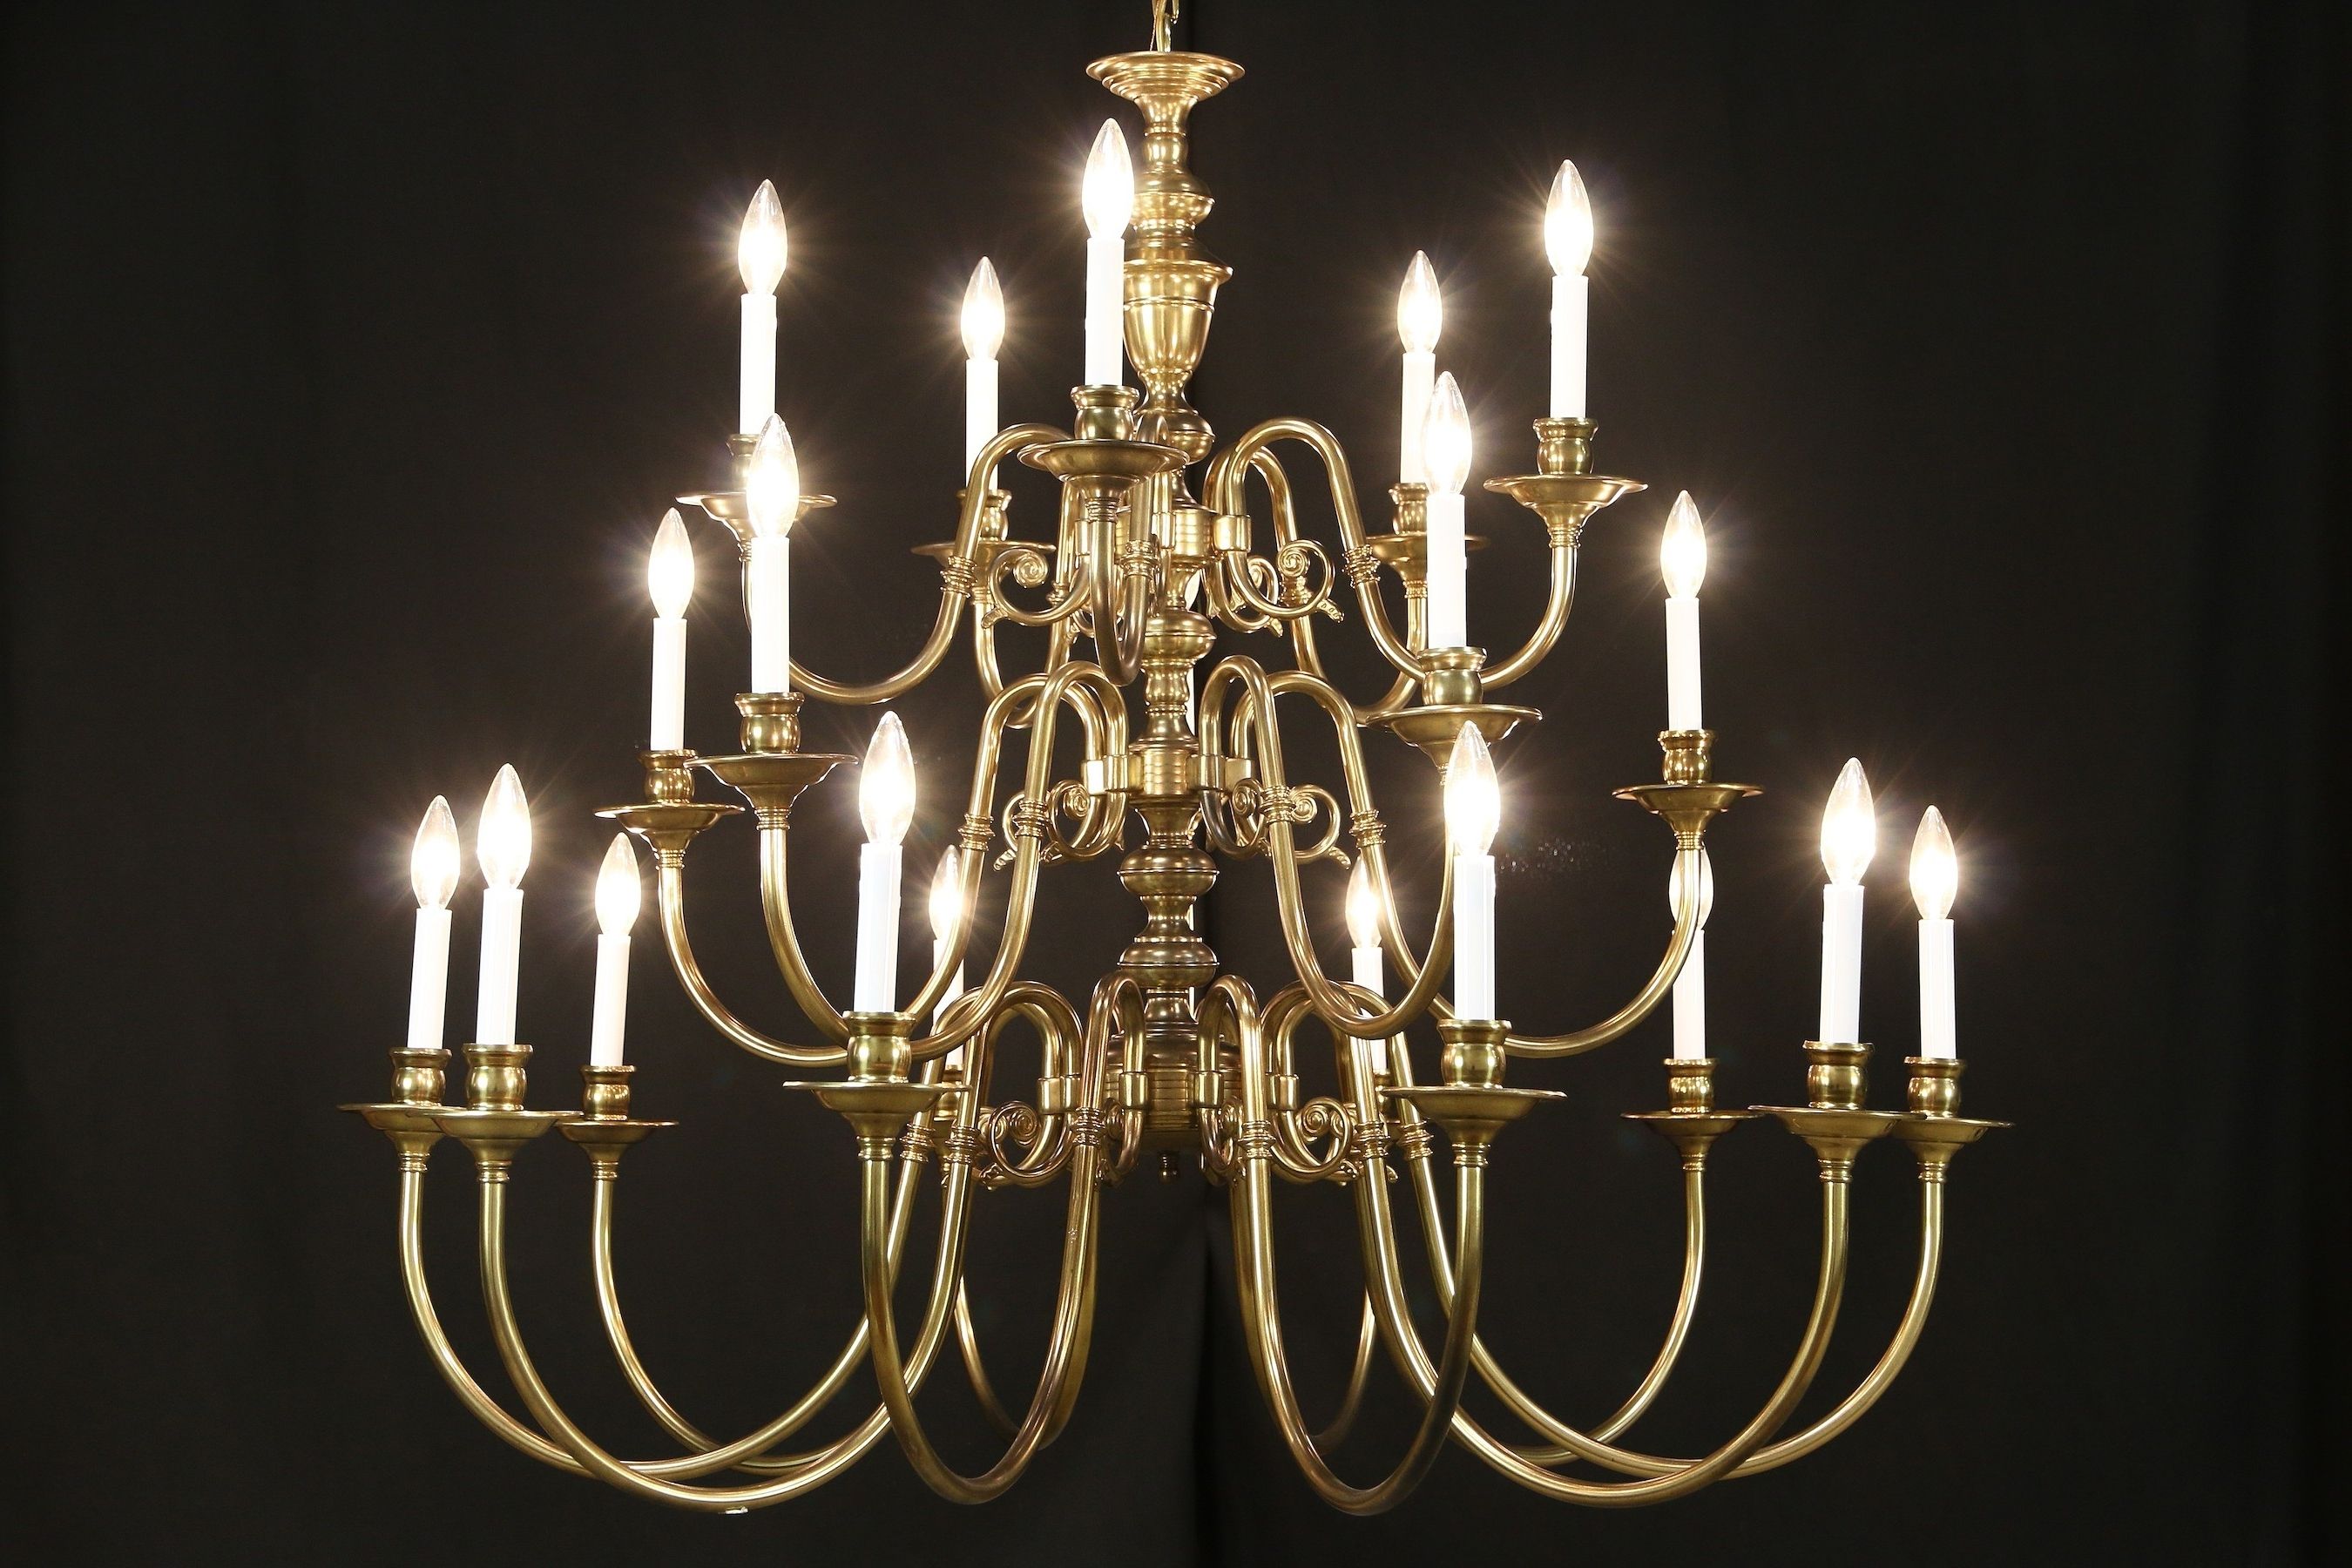 Georgian Style Chandelier, Vintage 3 Tier Patinated Brass, 20 Intended For 2019 Georgian Chandeliers (View 4 of 20)